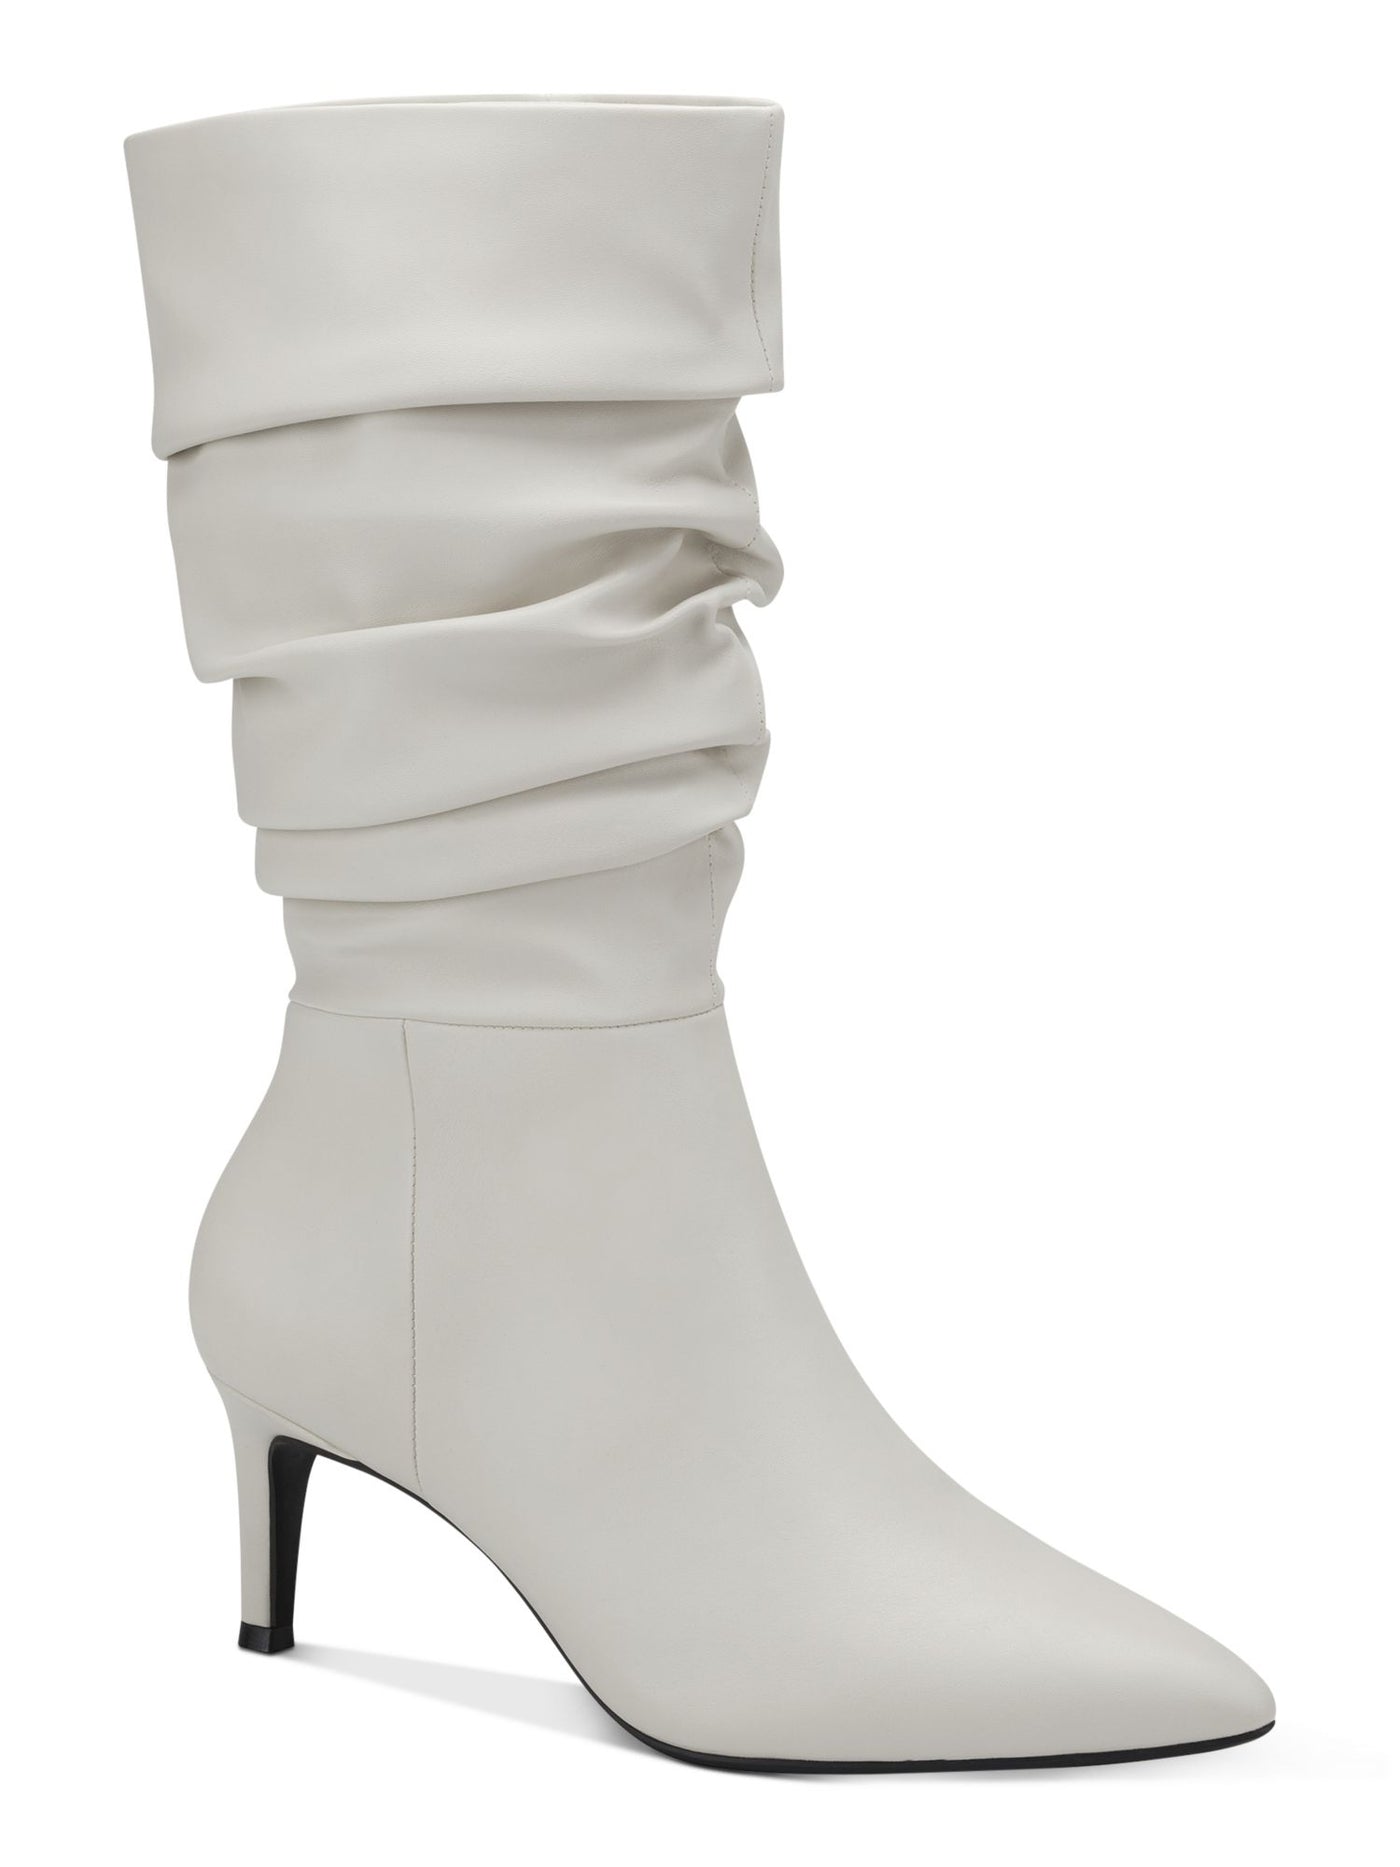 ALFANI Womens White Ruched Padded Lissa Pointed Toe Stiletto Zip-Up Dress Slouch Boot 10 M